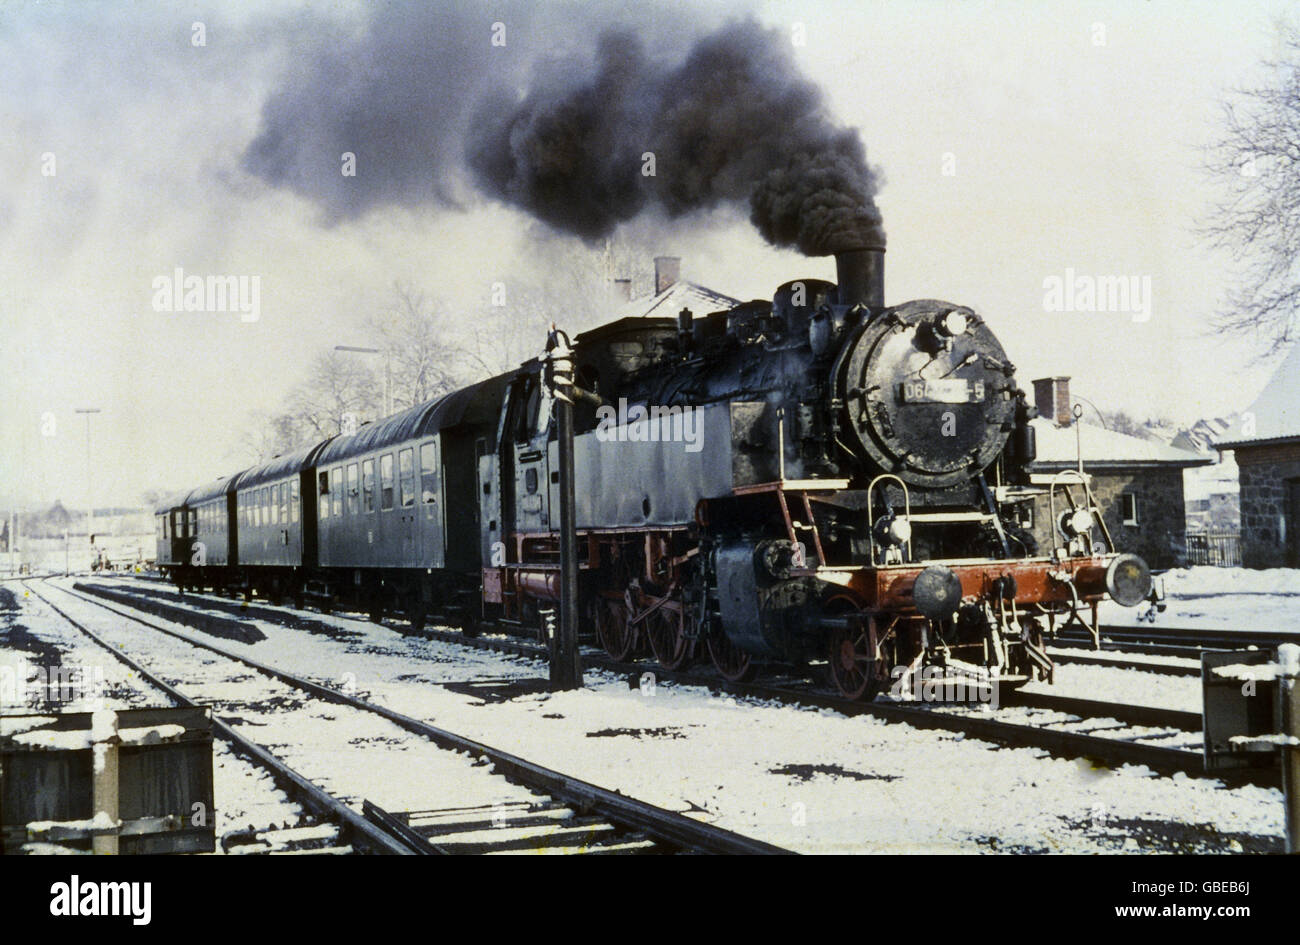 transport / transportation, railway, locomotives, Lok 064424, Bw Weiden, P 3824, filling up water at Vohenstrauss, 3.4.1970, 1970s, 70s, 20th century, historic, historical, Bavaria, Upper Palatinate, steam railway, steam locomotive, steam locomotives, railway, railroad, railways, railroads, passenger train, attention, maintenance, service, maintenances, fume, dense smoke, winter, train, trains, Additional-Rights-Clearences-Not Available Stock Photo